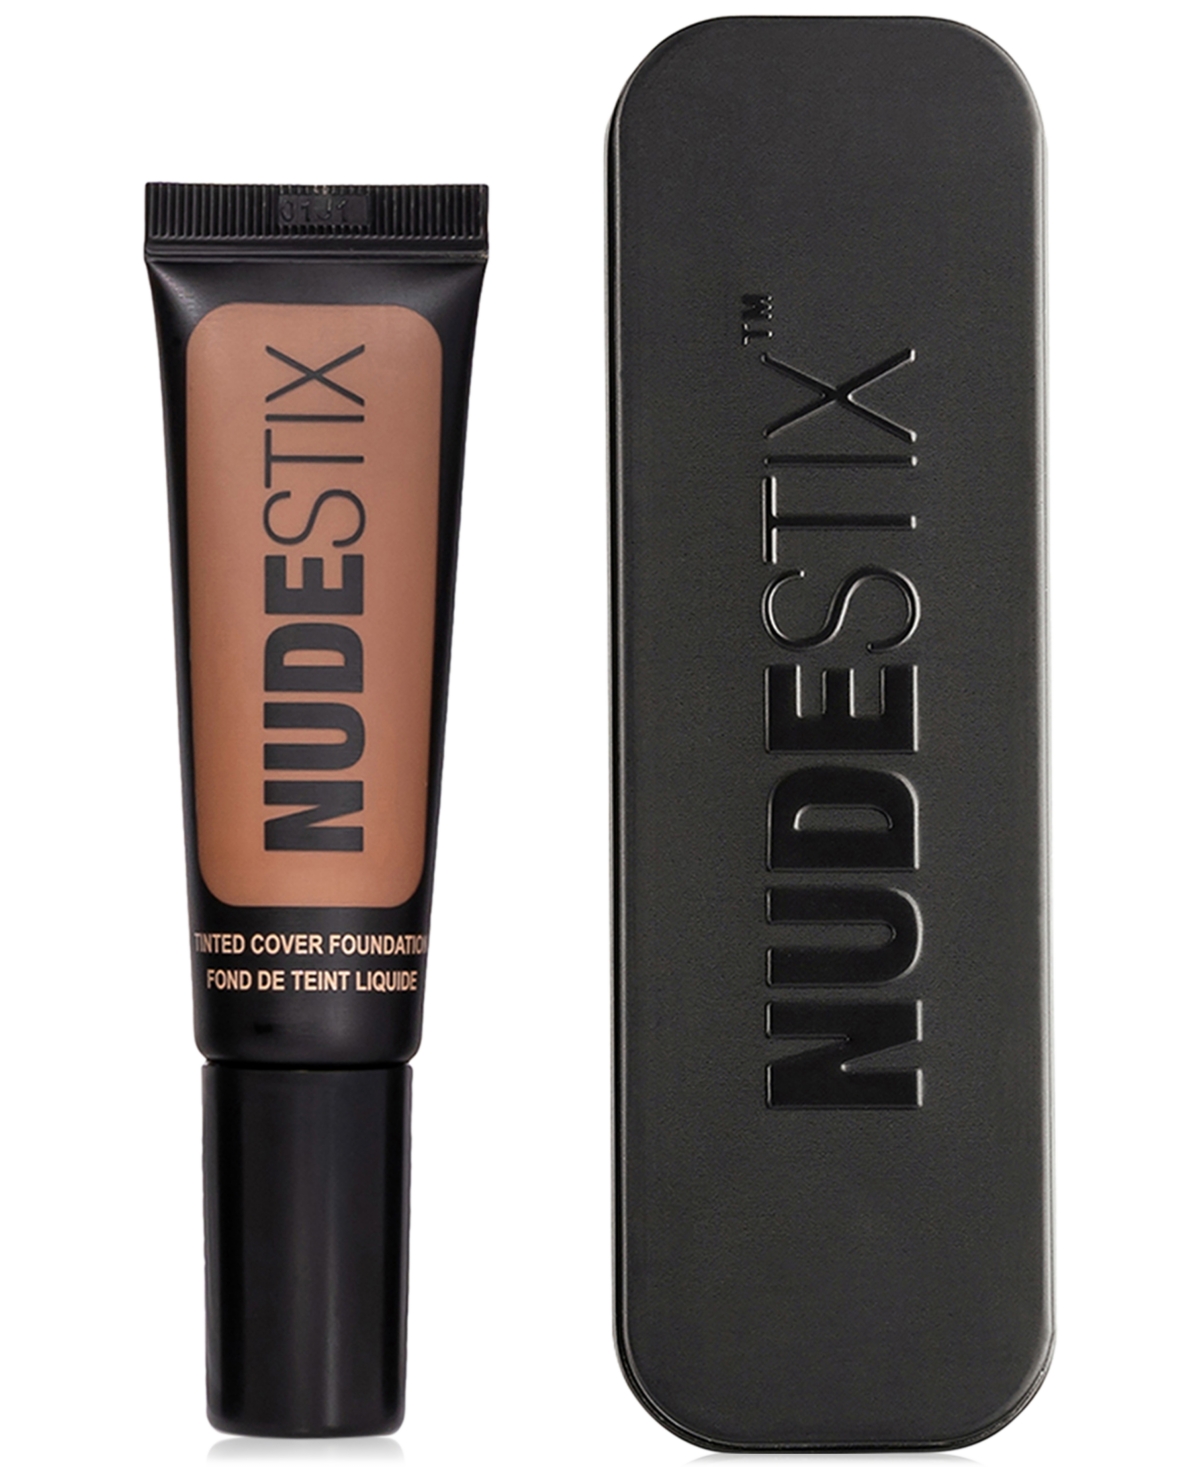 Tinted Cover Foundation, 0.68 oz. - NUDE  (deep neutral cool)